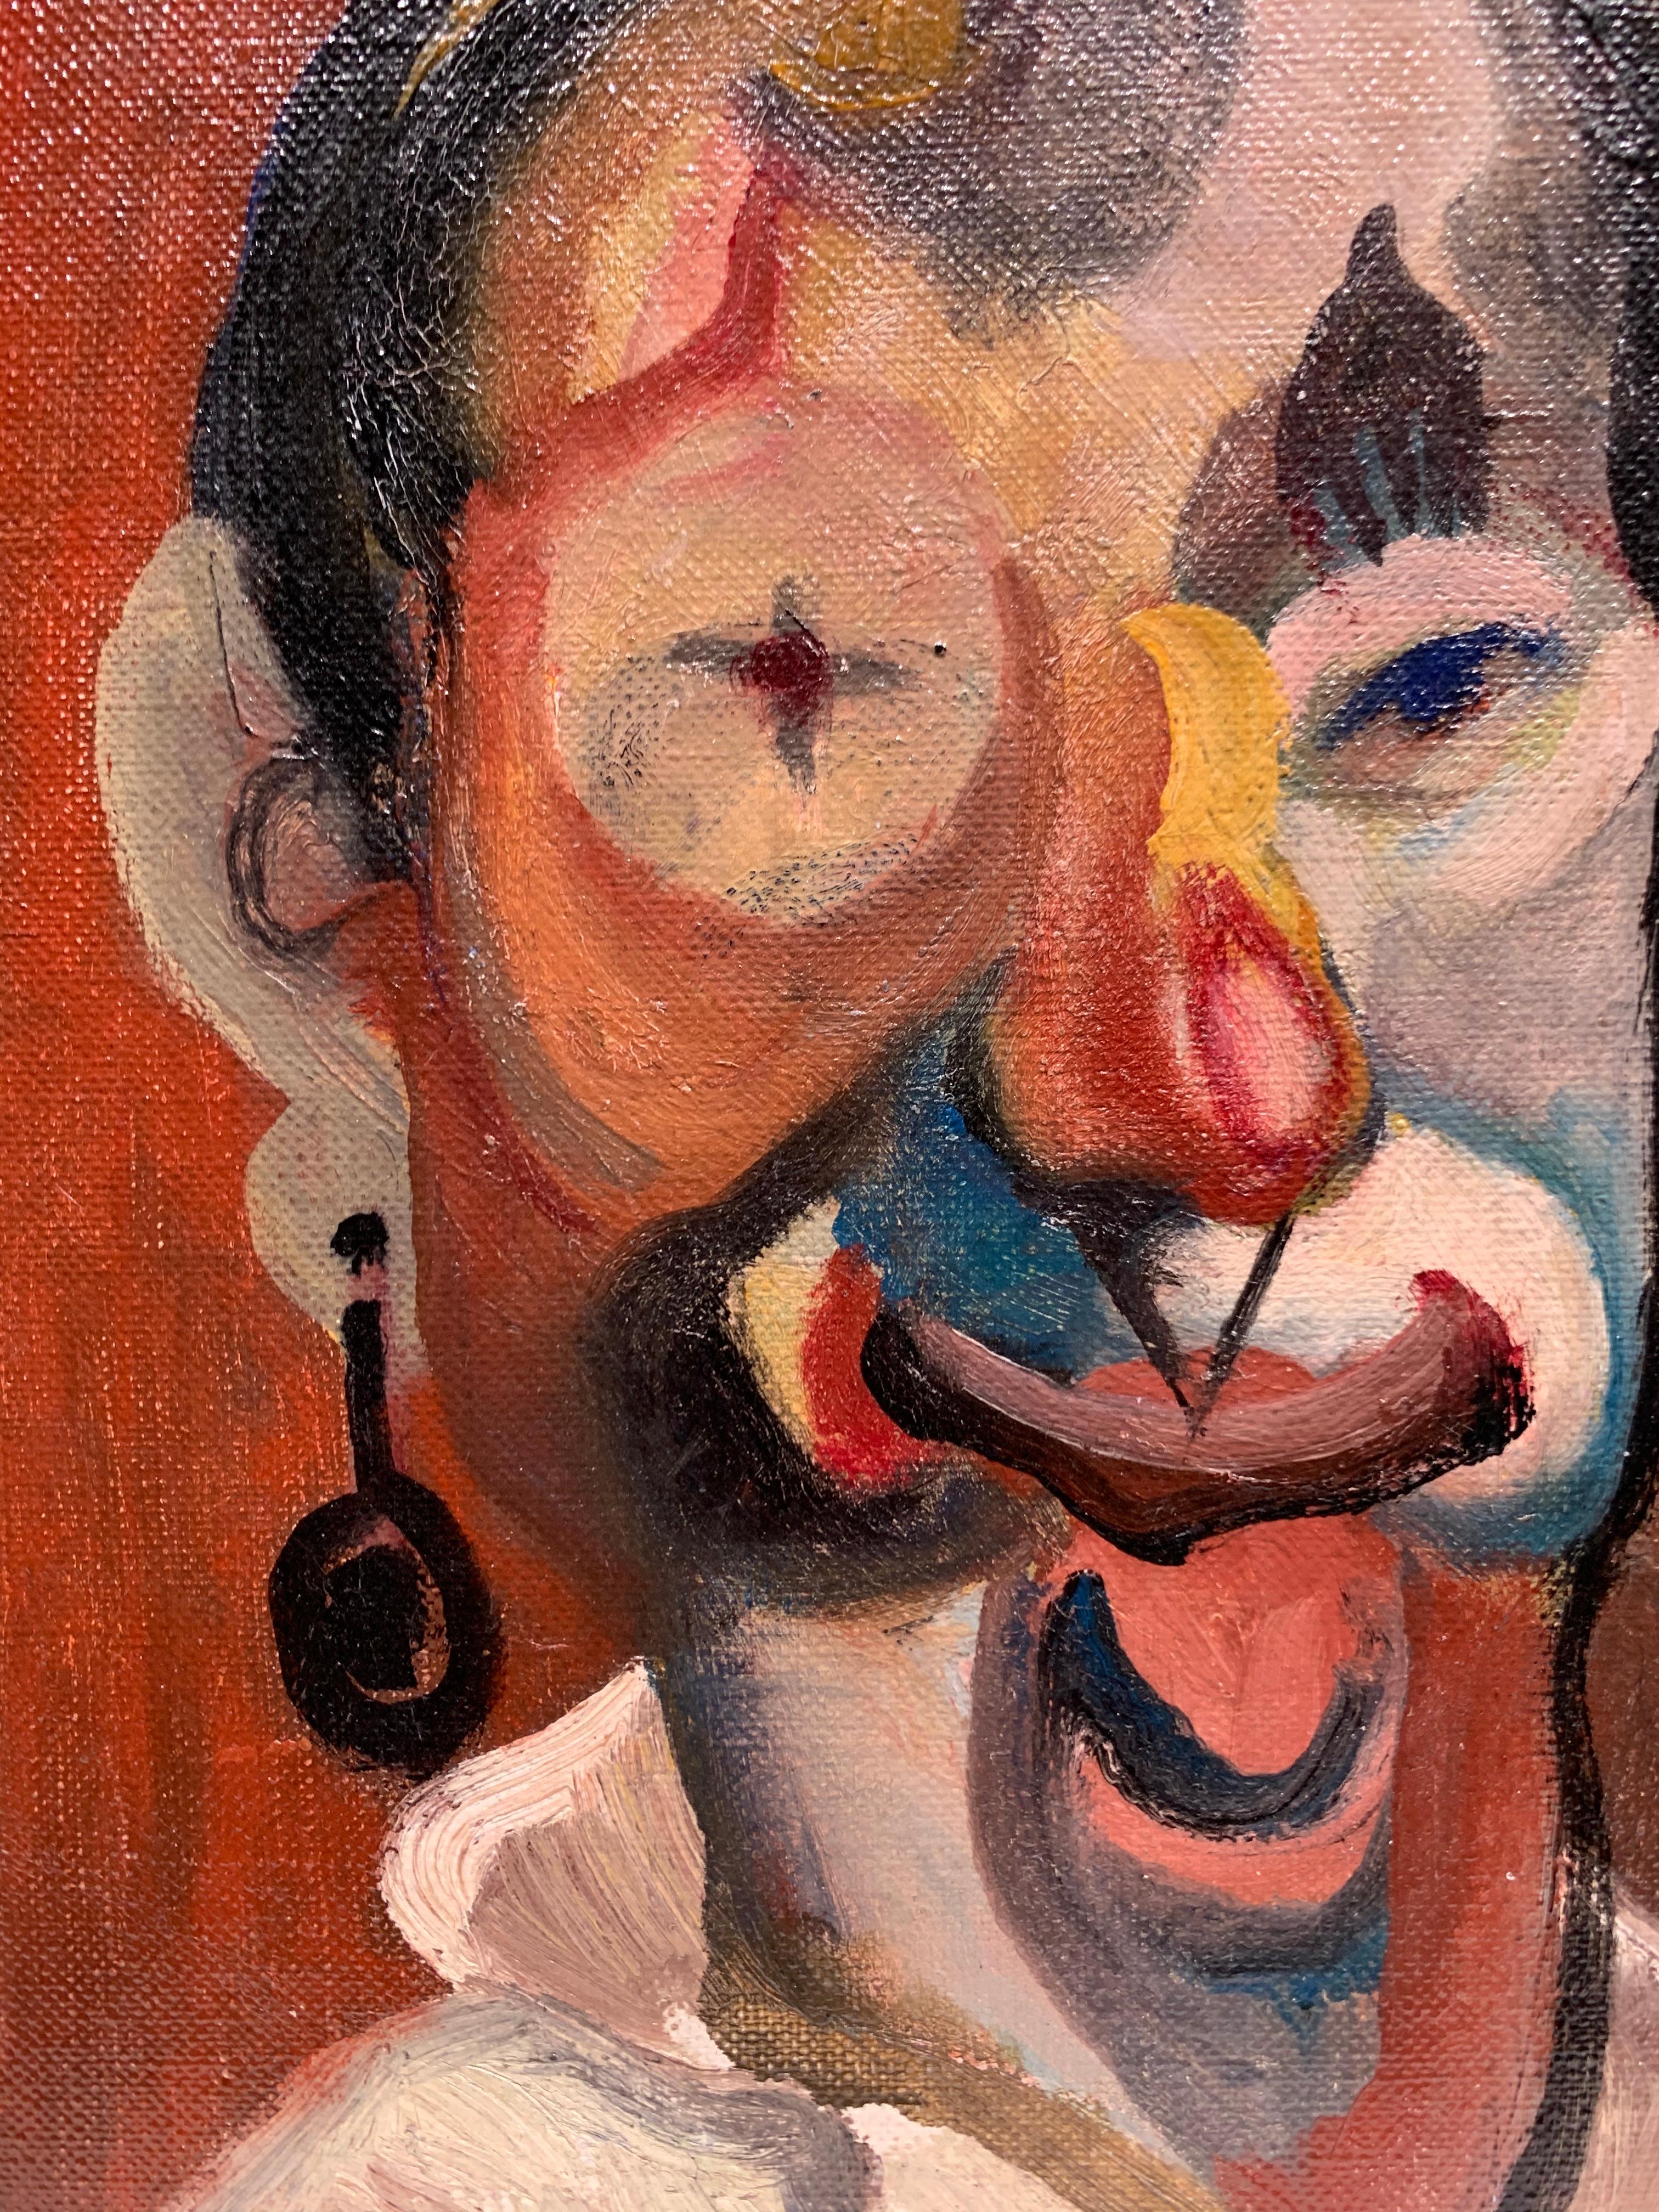 The Clown (Abstract Portrait)  - Painting by Abraham Hankins